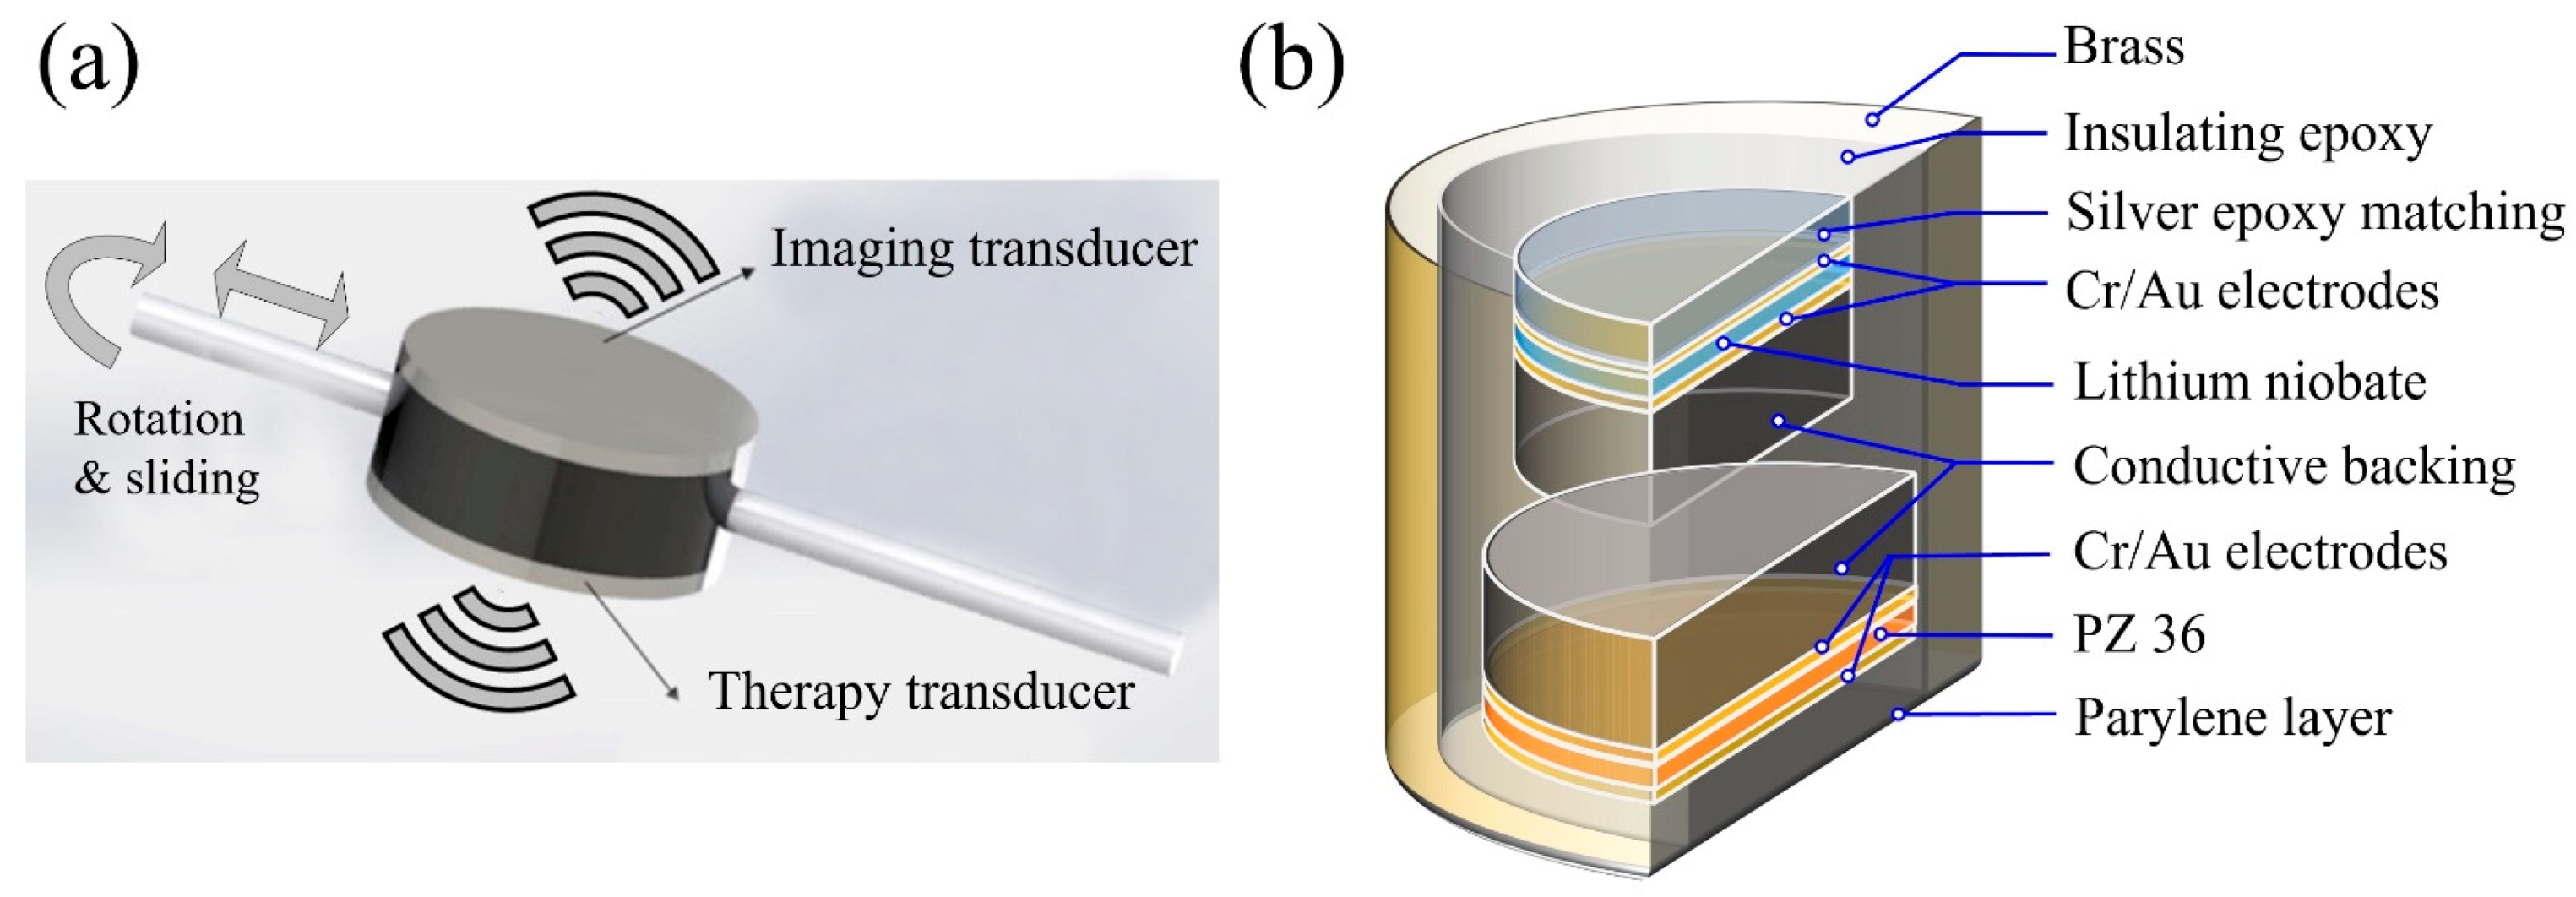 Sensors | Free Full-Text | Thermal Ablation and High-Resolution Imaging  Using a Back-to-Back (BTB) Dual-Mode Ultrasonic Transducer: In Vivo Results